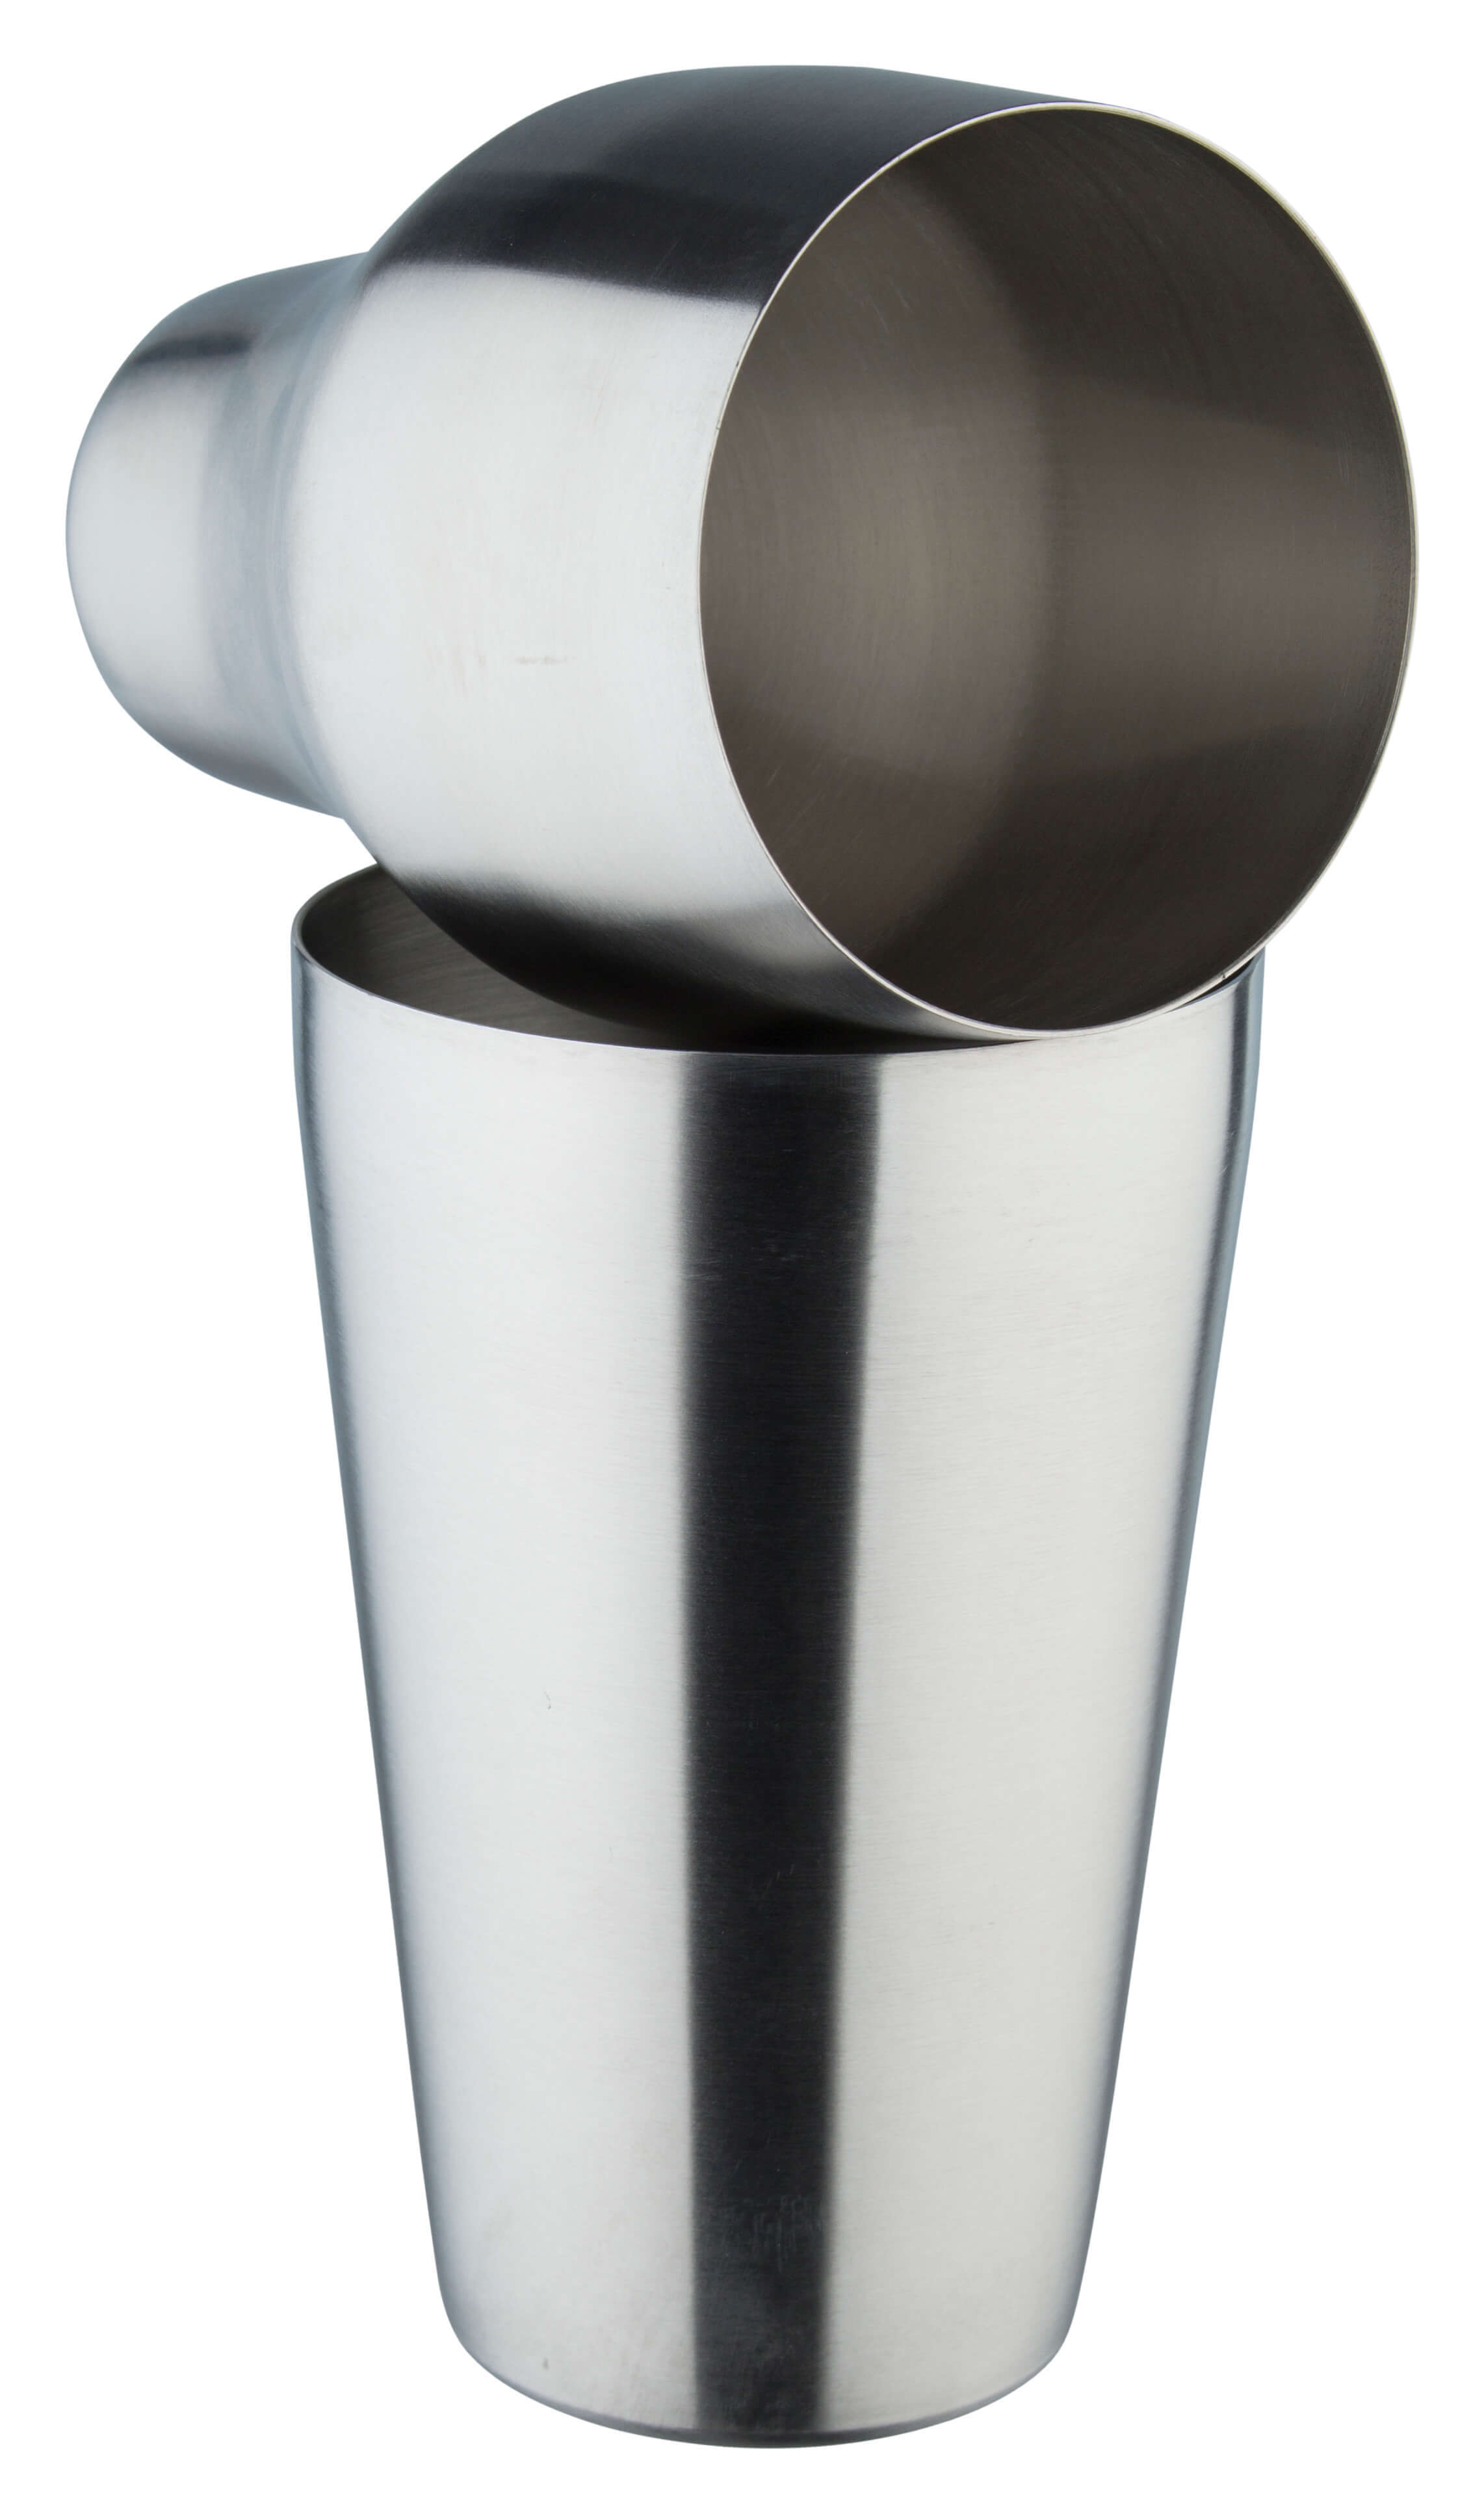 Cocktail shaker, BAR AID, dull stainless steel, twopartite (500ml)